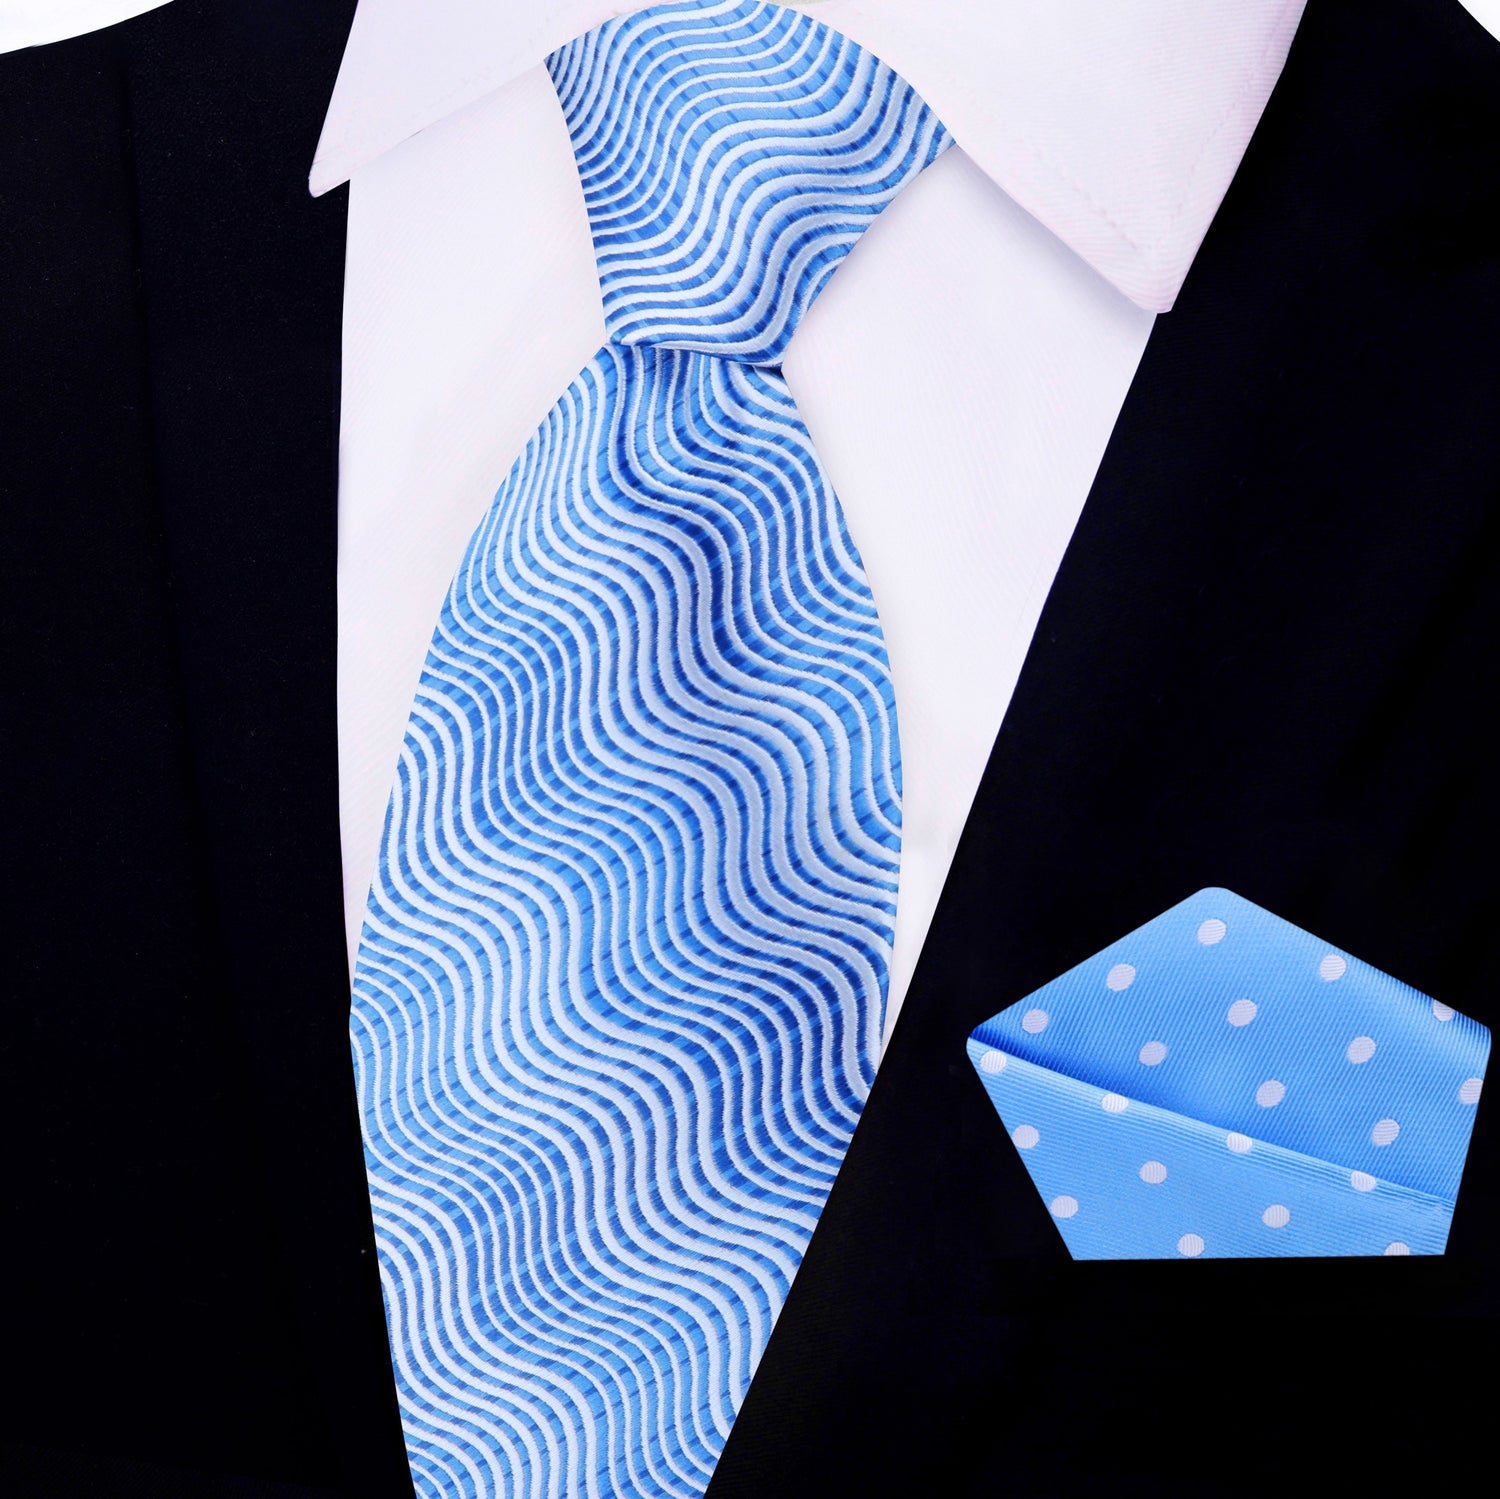 View 2: Shades of Blue Wavy Lines Necktie with Light Blue, White Polka Pocket Square